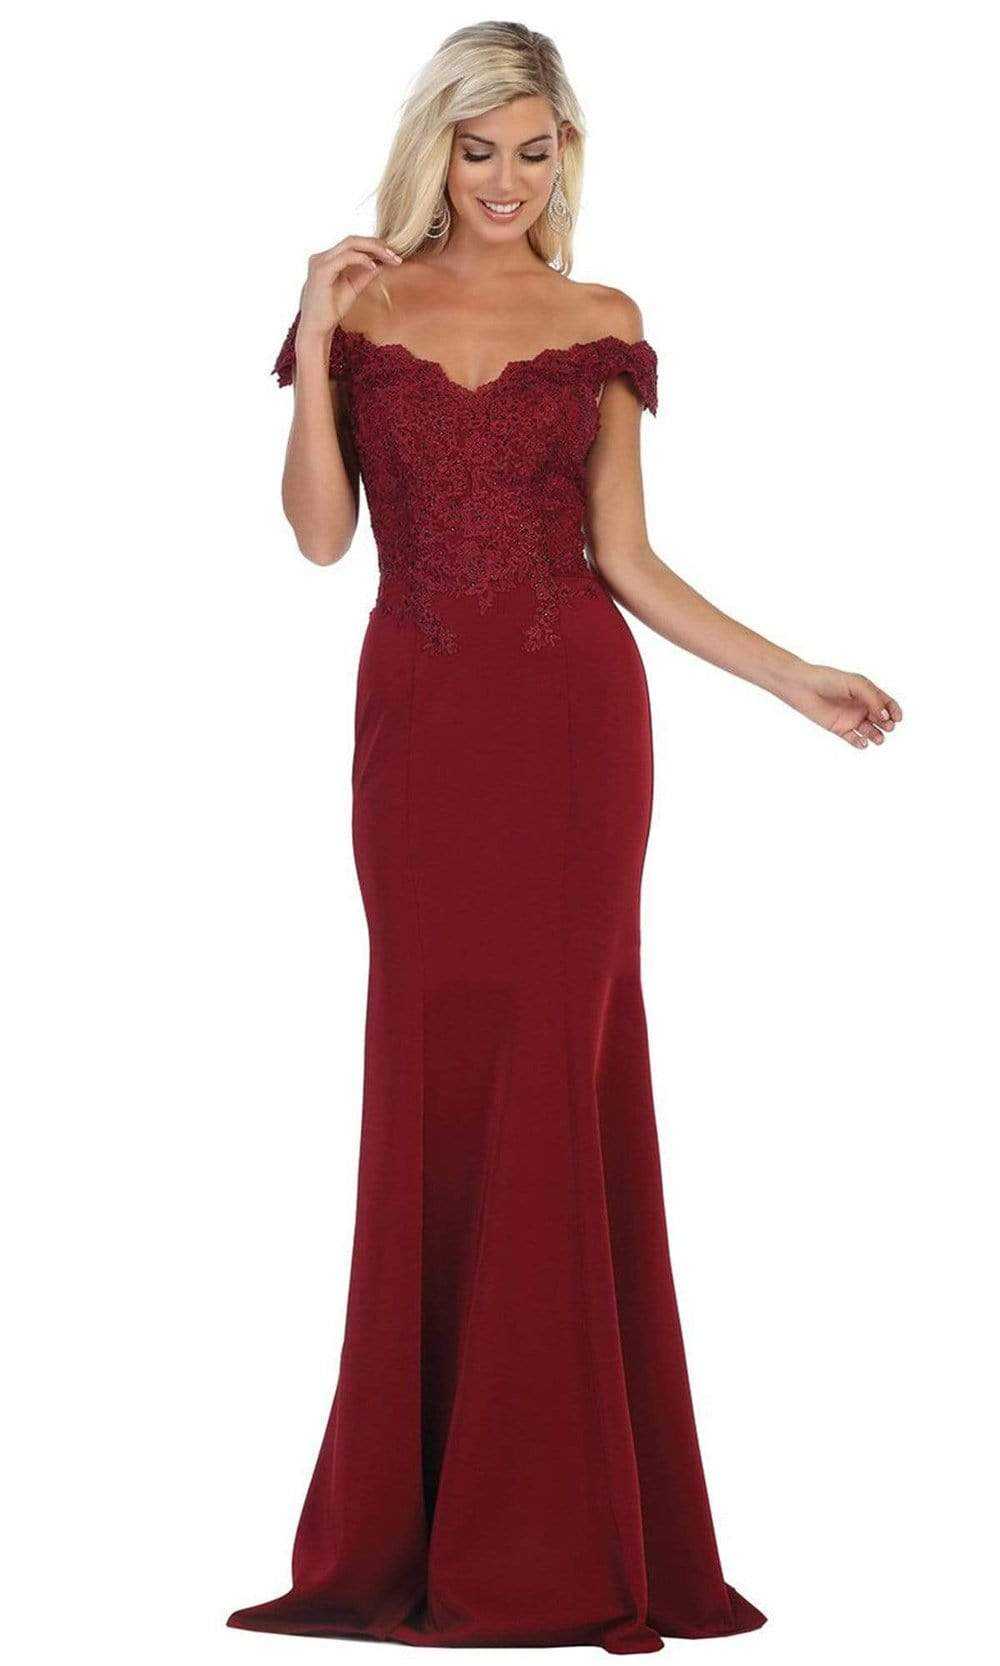 May Queen, May Queen - Scalloped Off-Shoulder Trumpet Dress MQ1675